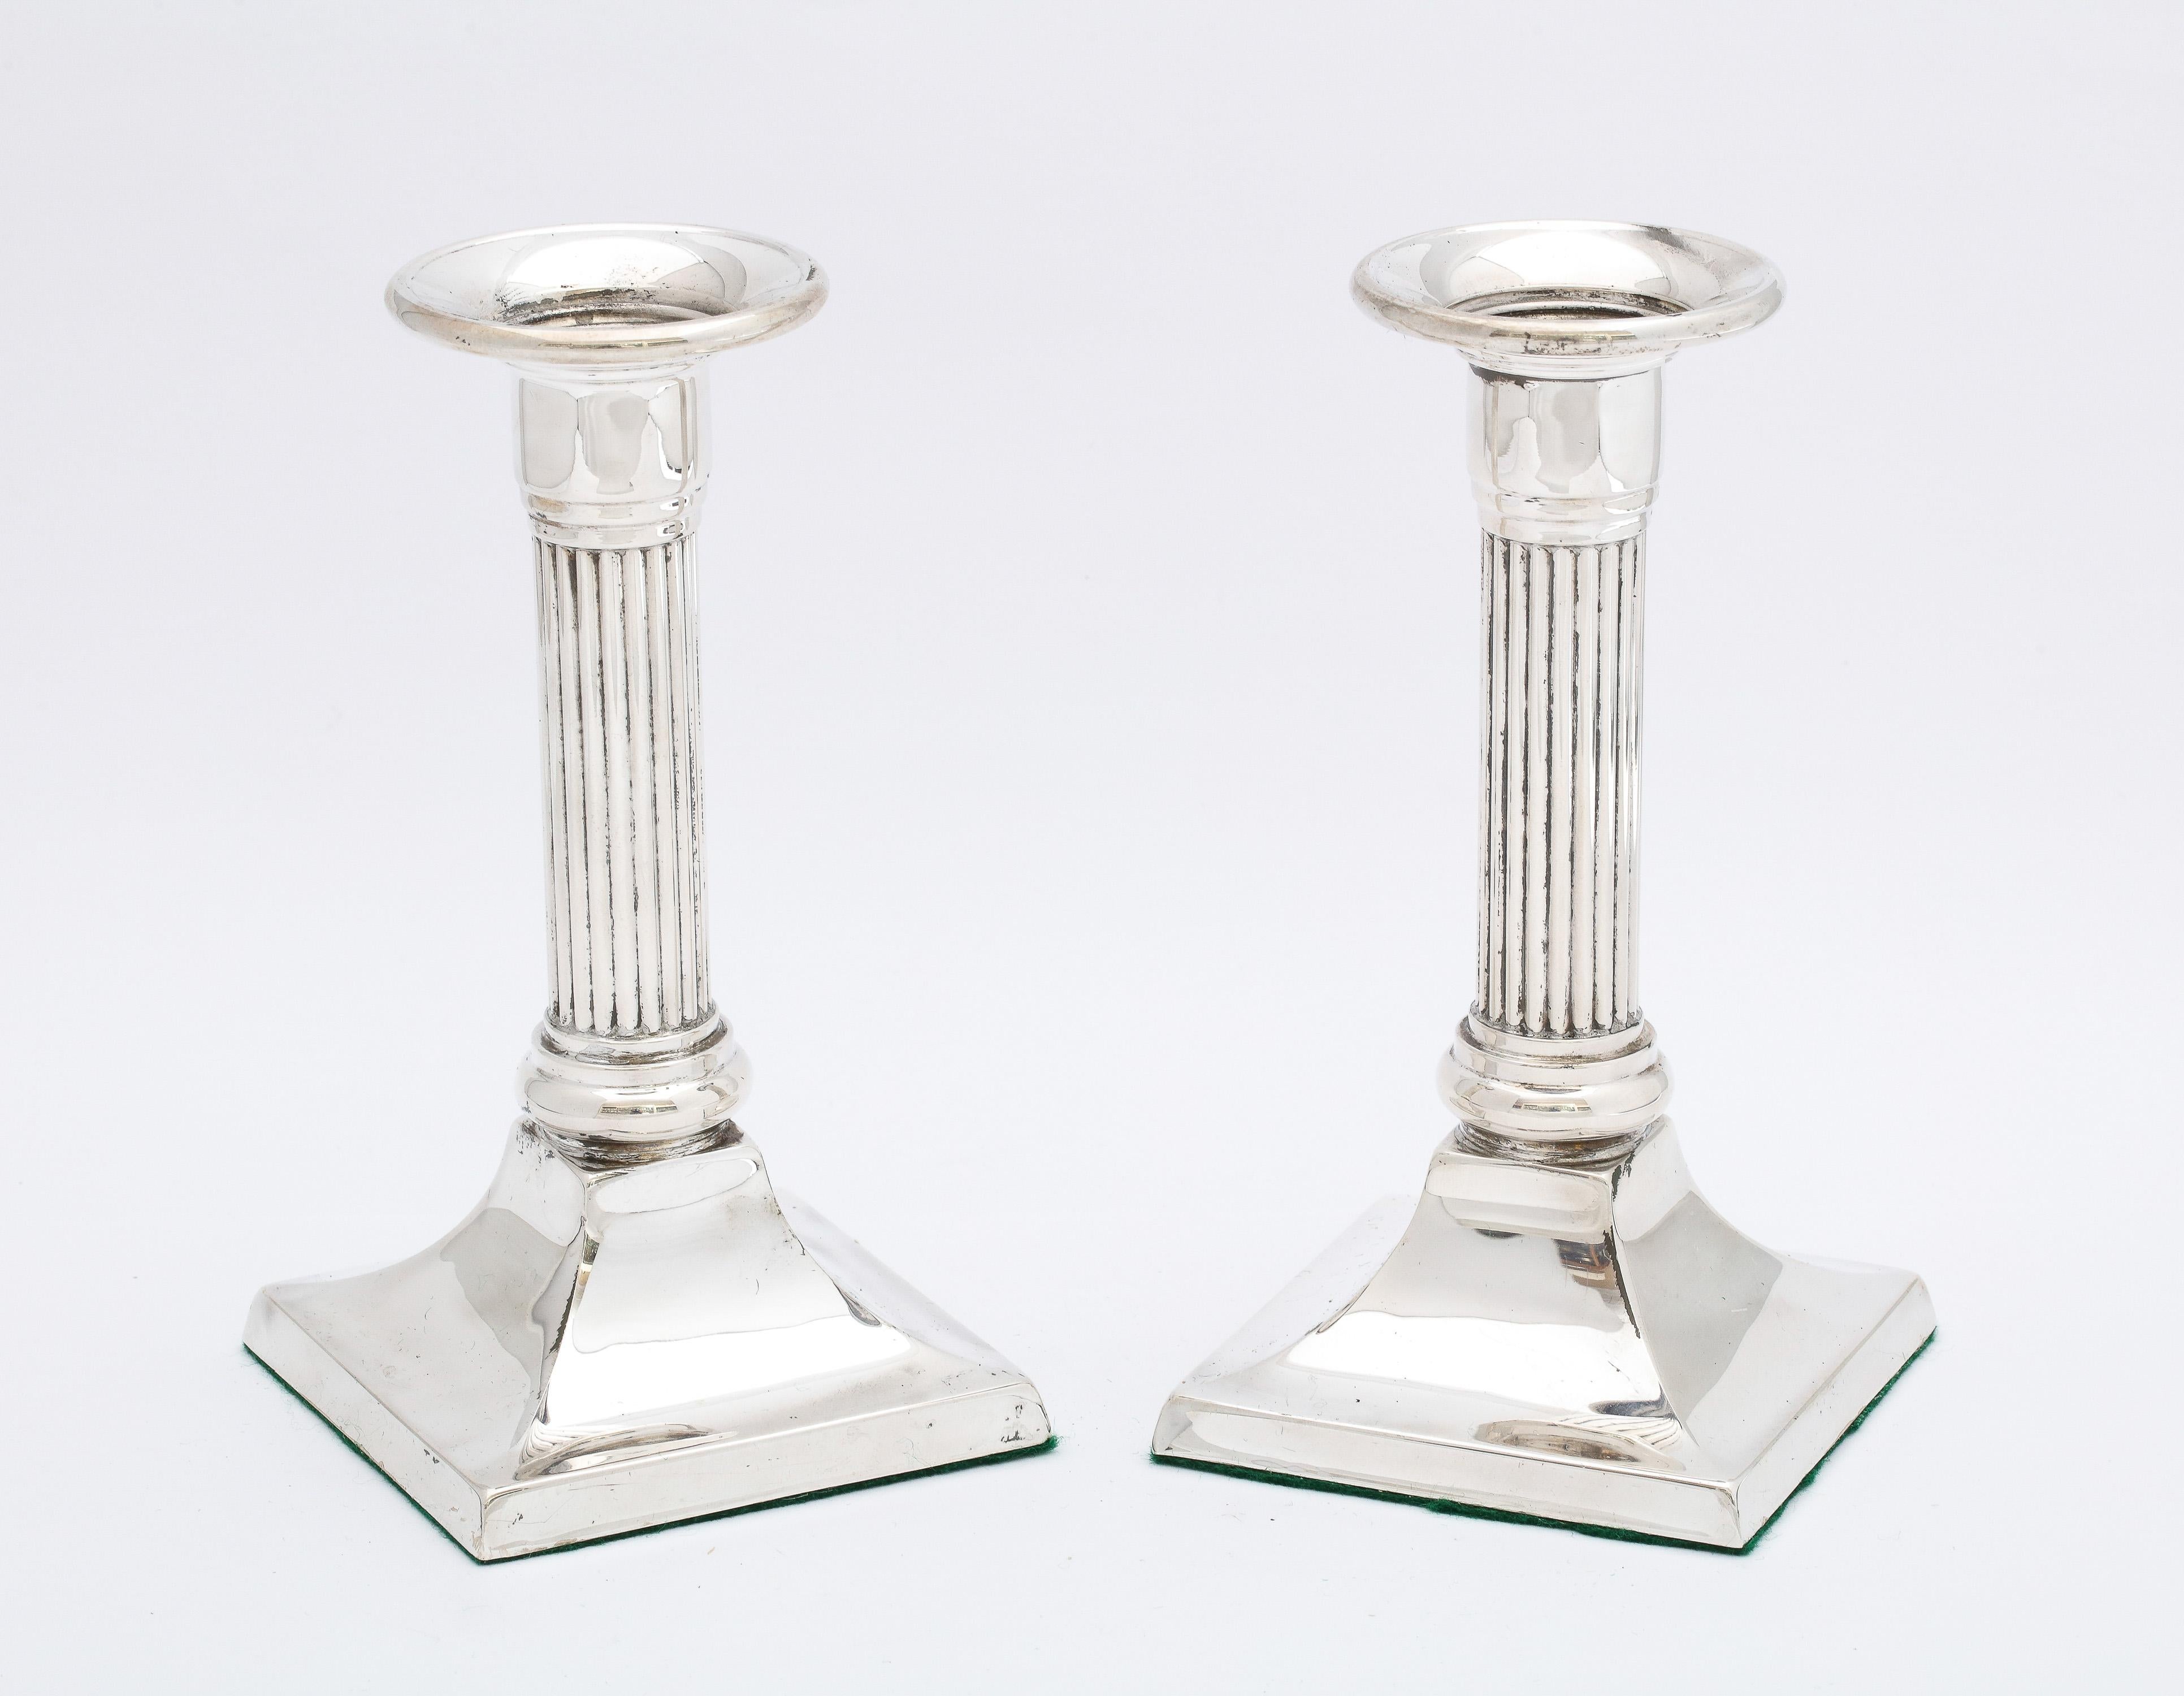 Pair of sterling silver, Neoclassical-Style, column-form candlesticks, American, Ca. 1930's. Each candlestick measures 5 3/4 inches high x 3  inches deep (at deepest point) x 3 inches wide (at widest point) . Weighted. The underside of each